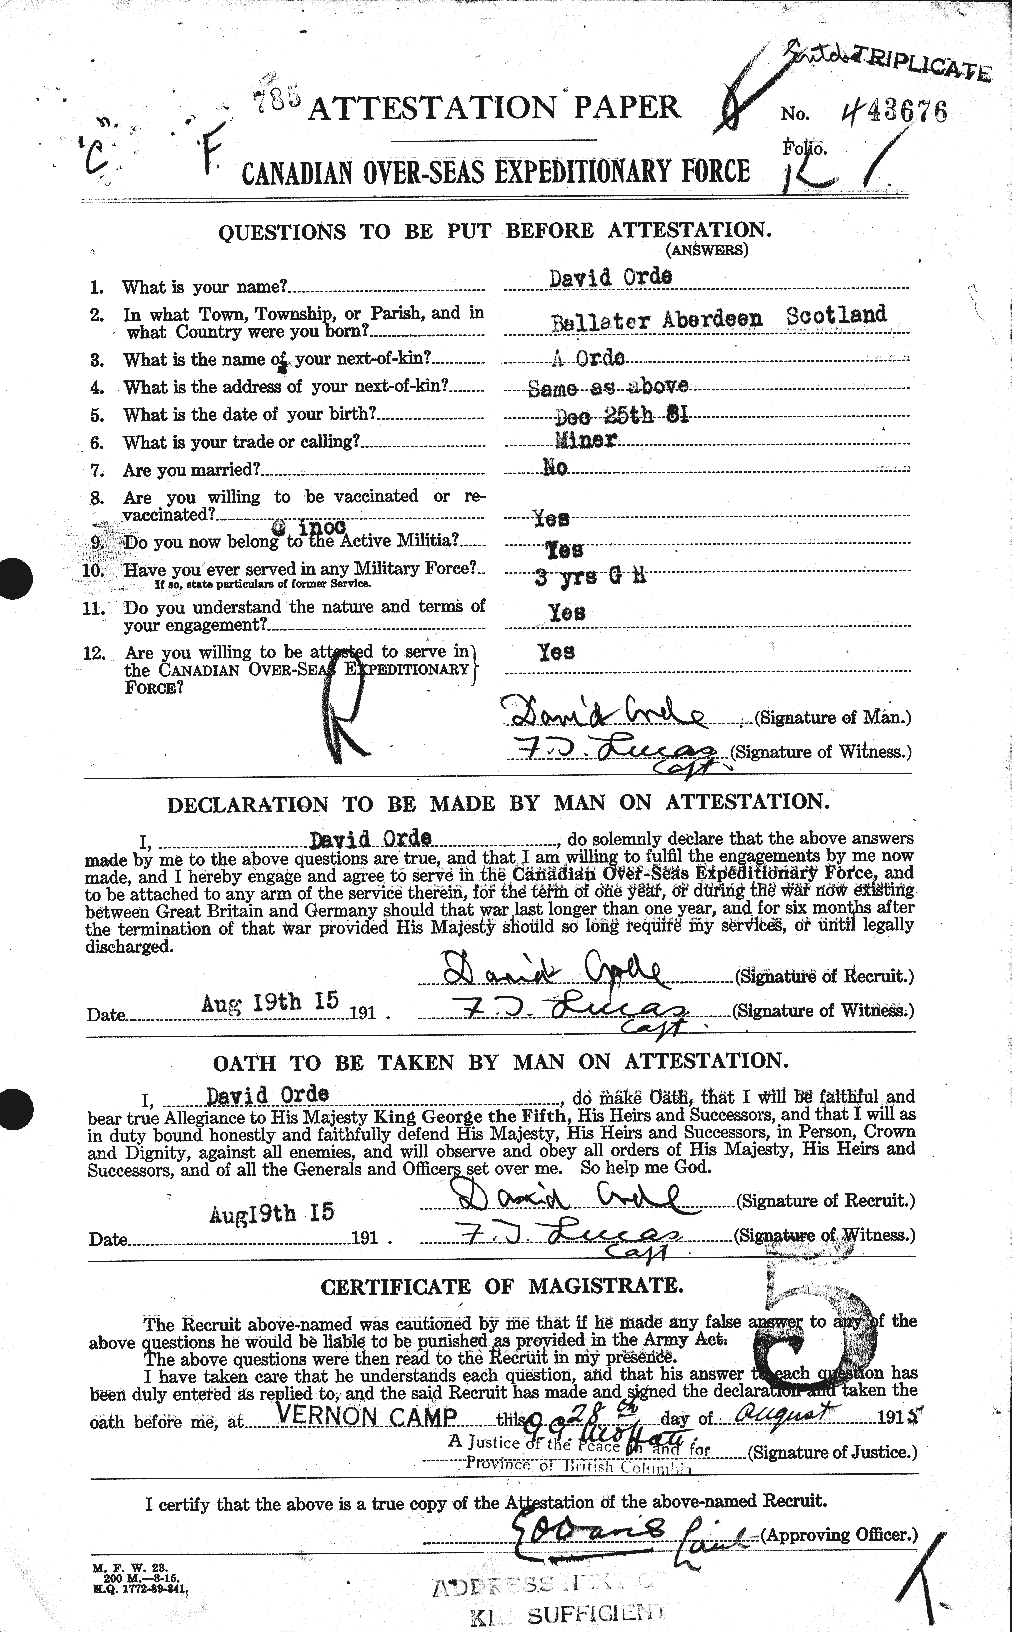 Personnel Records of the First World War - CEF 559415a